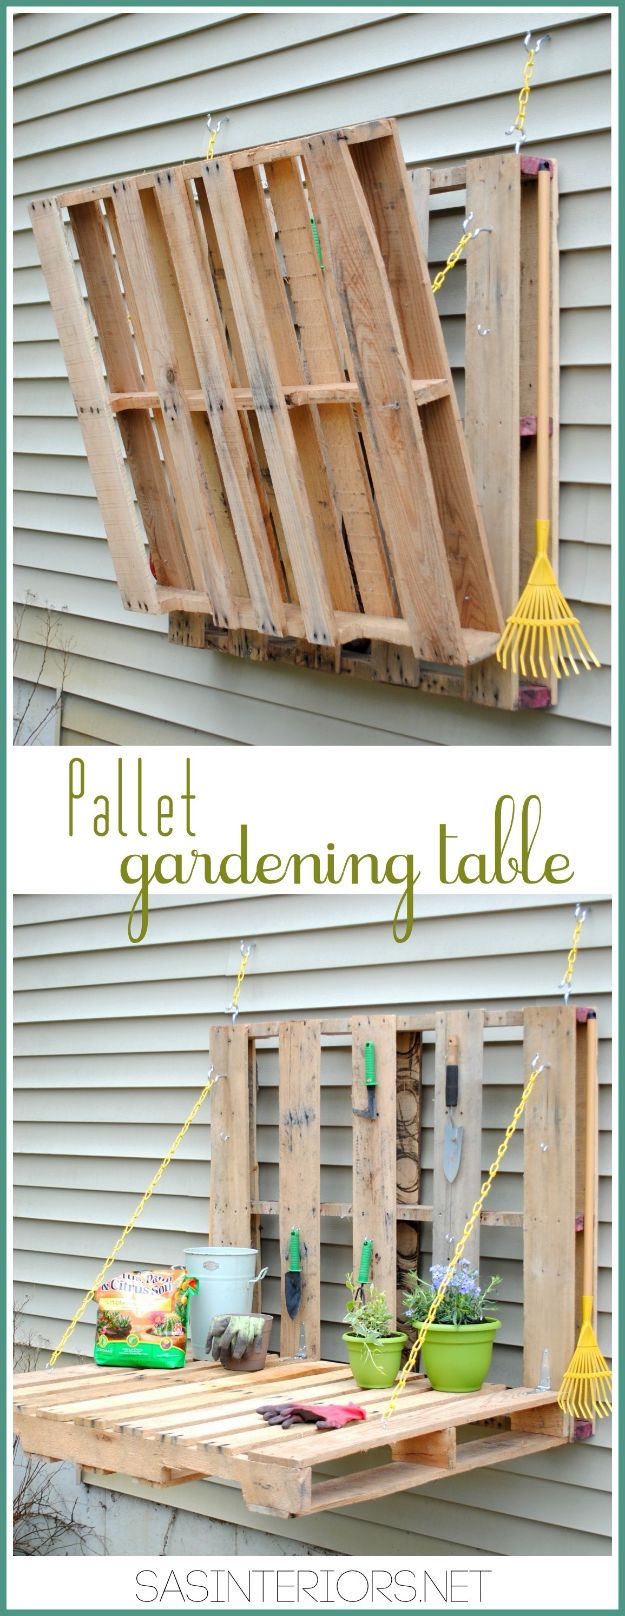 DIY Patio Furniture Ideas - Pallet Gardening Table - Cheap Do It Yourself Porch and Easy Backyard Furniture, Rocking Chairs, Swings, Benches, Stools and Seating Tutorials - Dining Tables from Pallets, Cinder Blocks and Upcyle Ideas - Sectional Couch Plans With Cushions - Makeover Tips for Existing Furniture #diyideas #outdoors #diy #backyardideas #diyfurniture #patio #diyjoy http://diyjoy.com/diy-patio-furniture-ideas